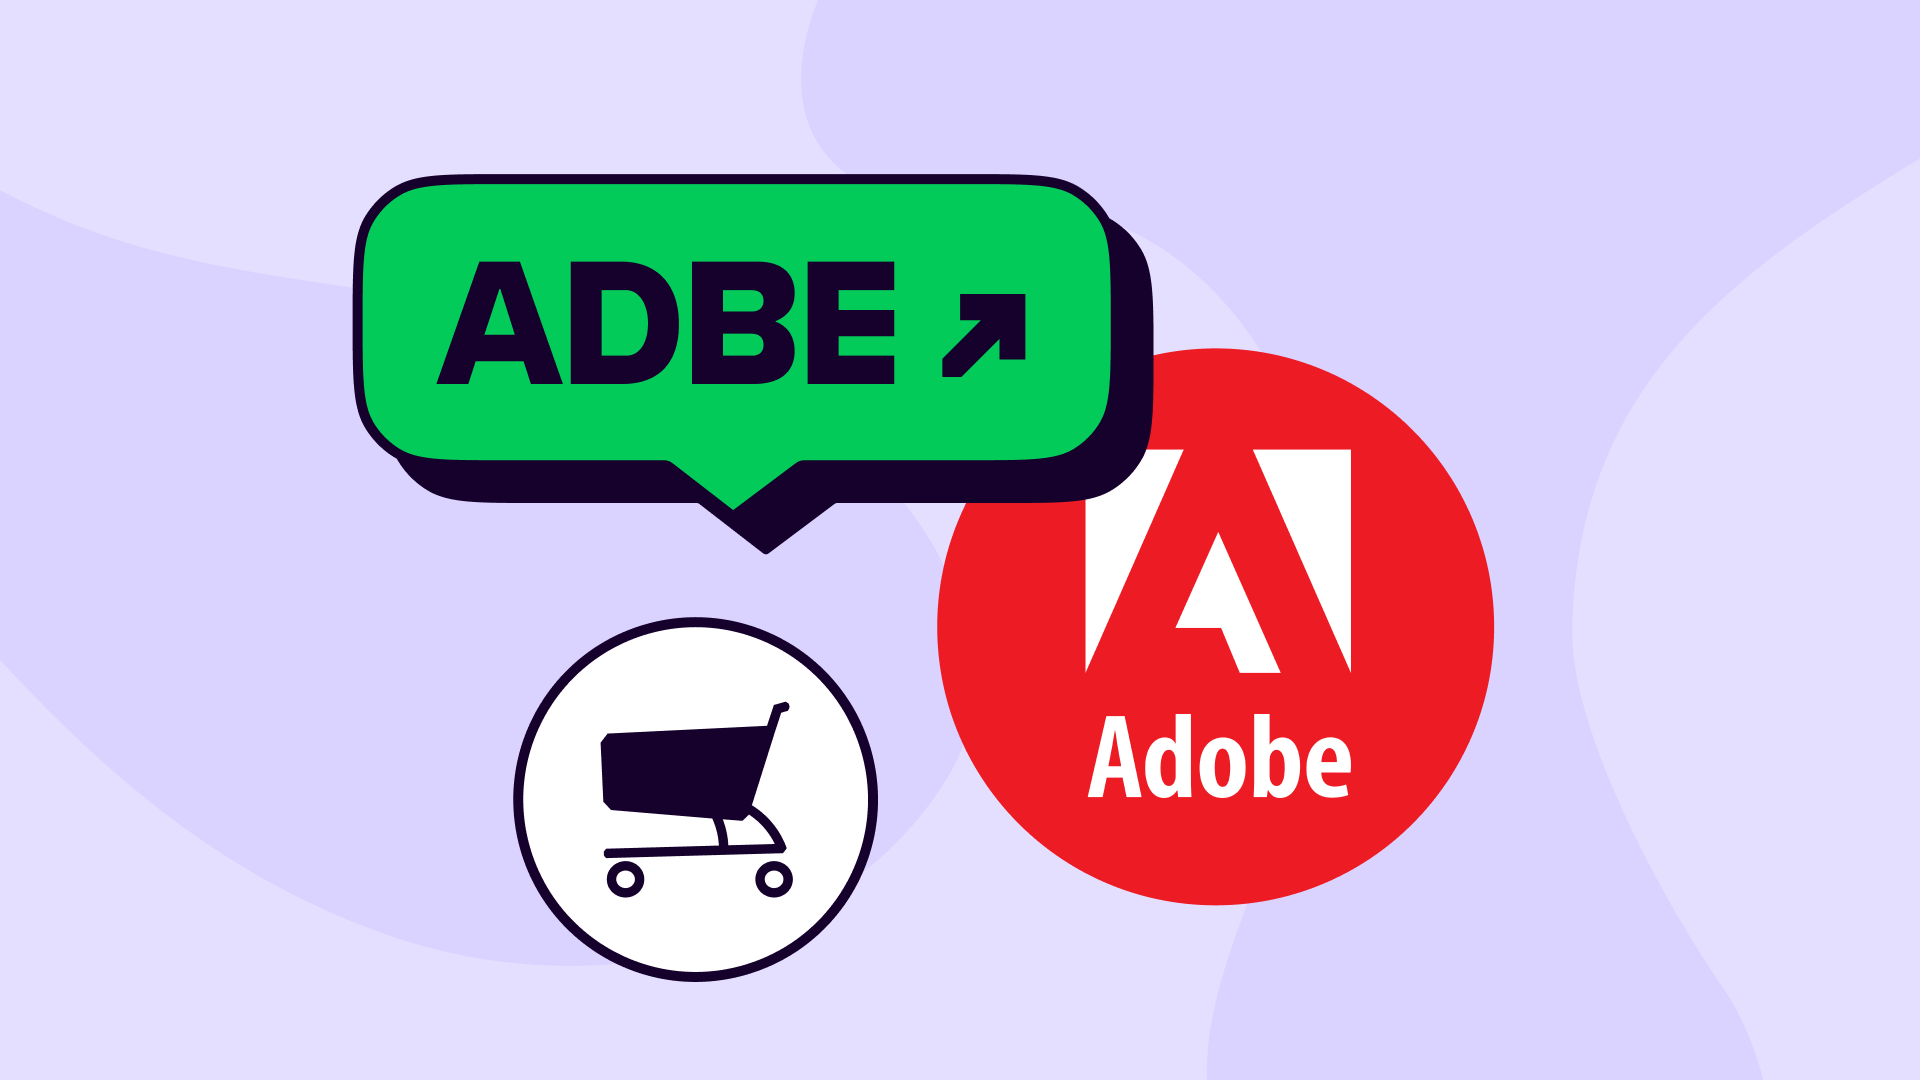 How to buy and sell Adobe shares